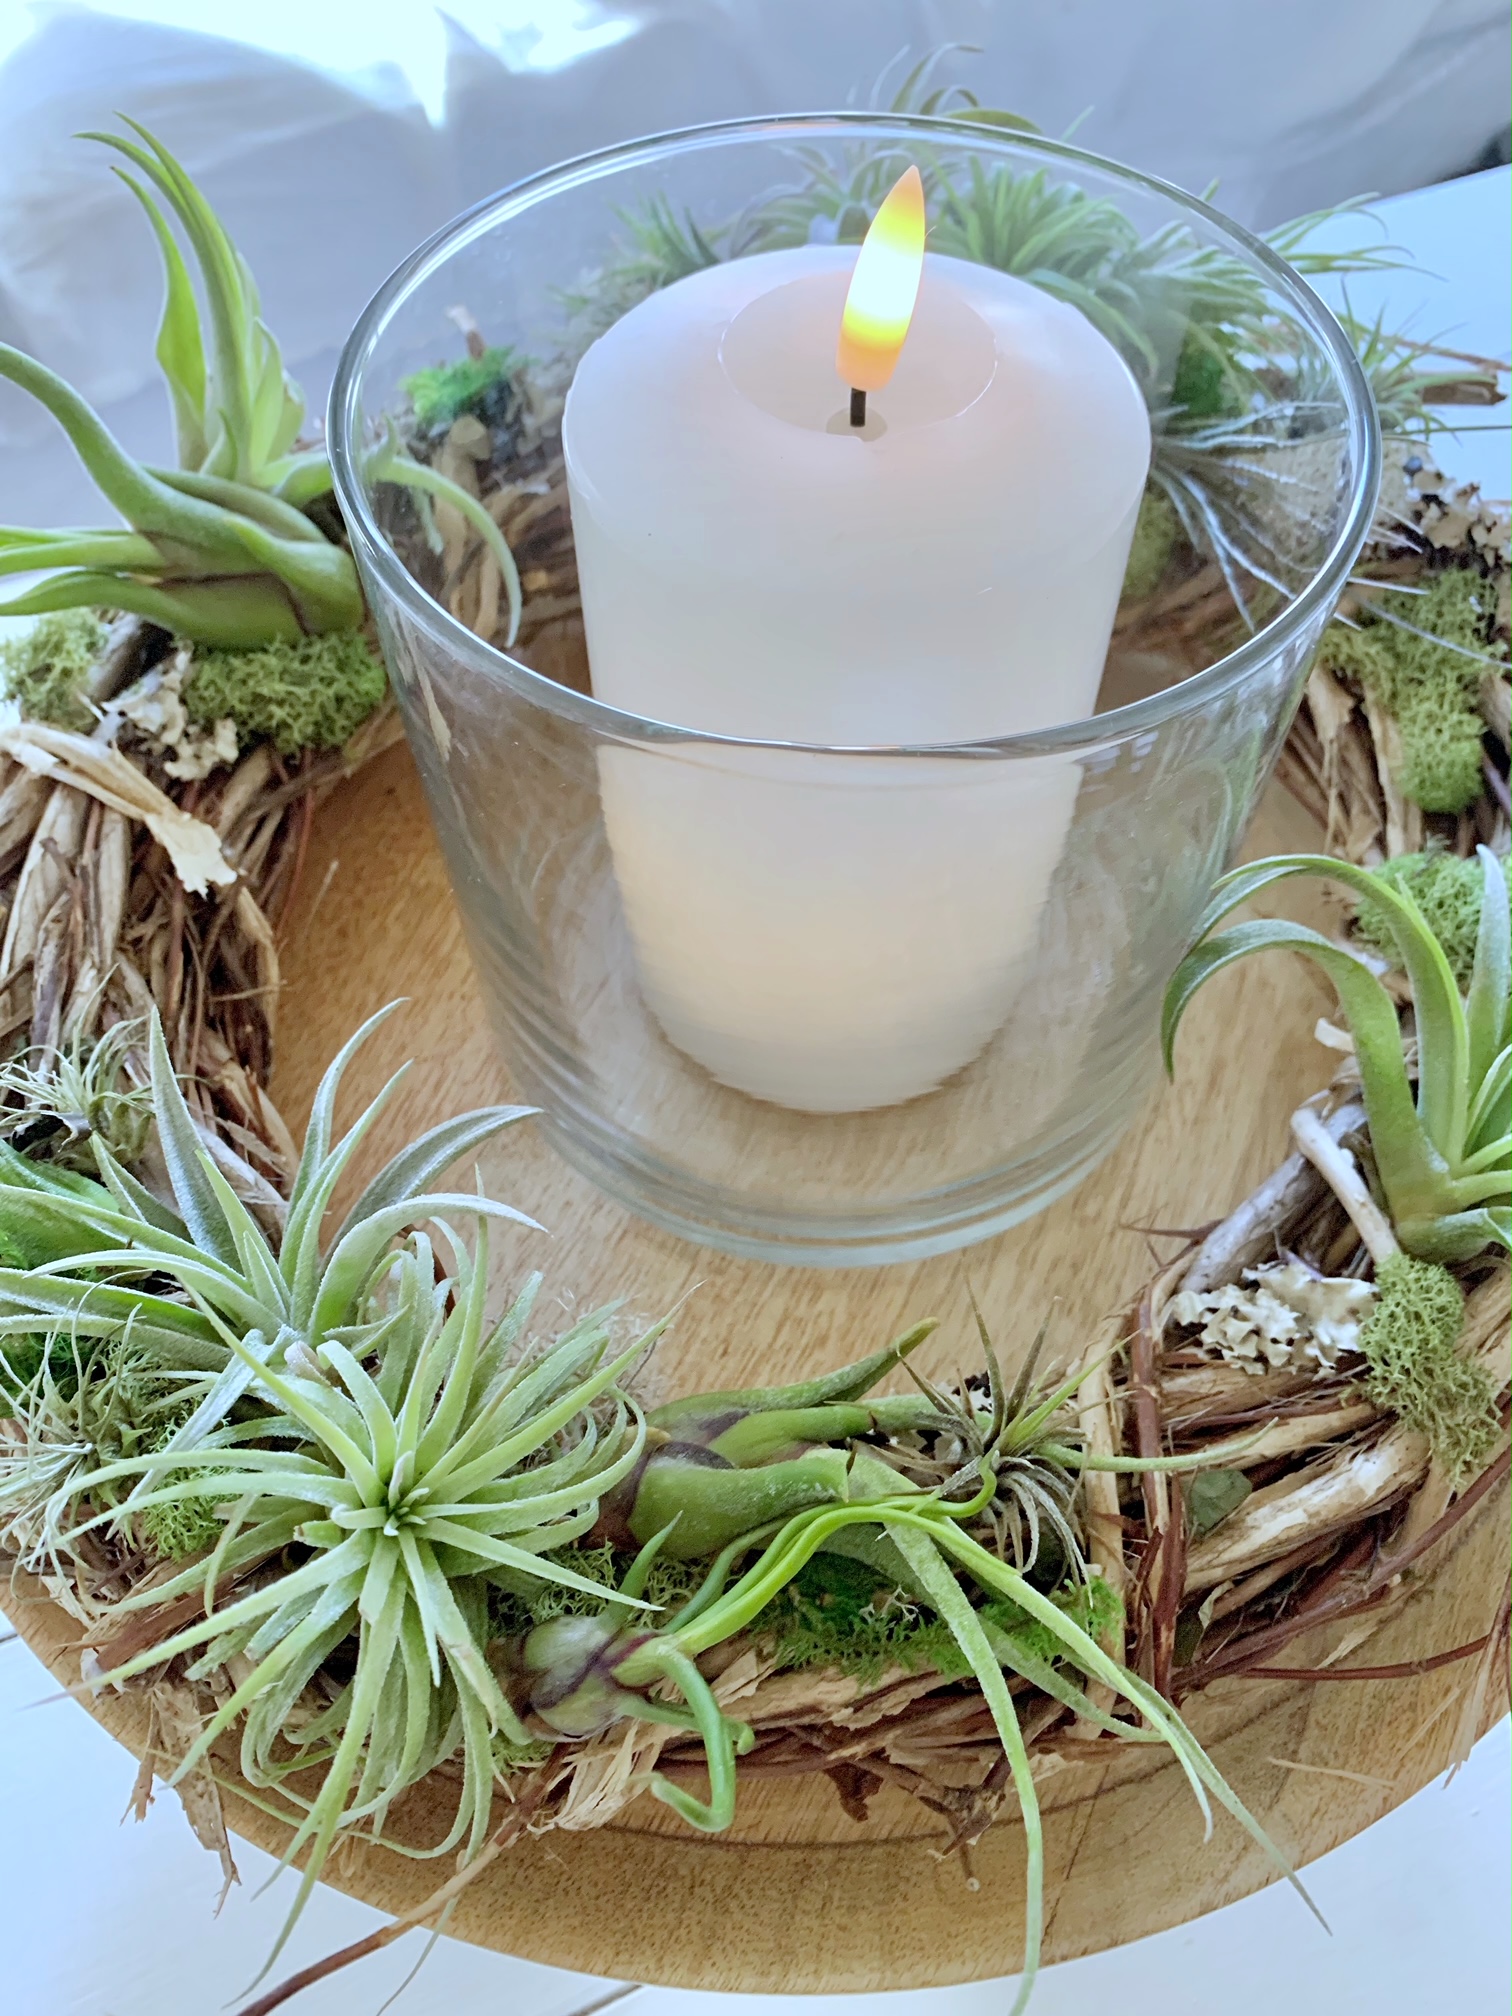 Where to Find Air Plants (Including a fun display idea)